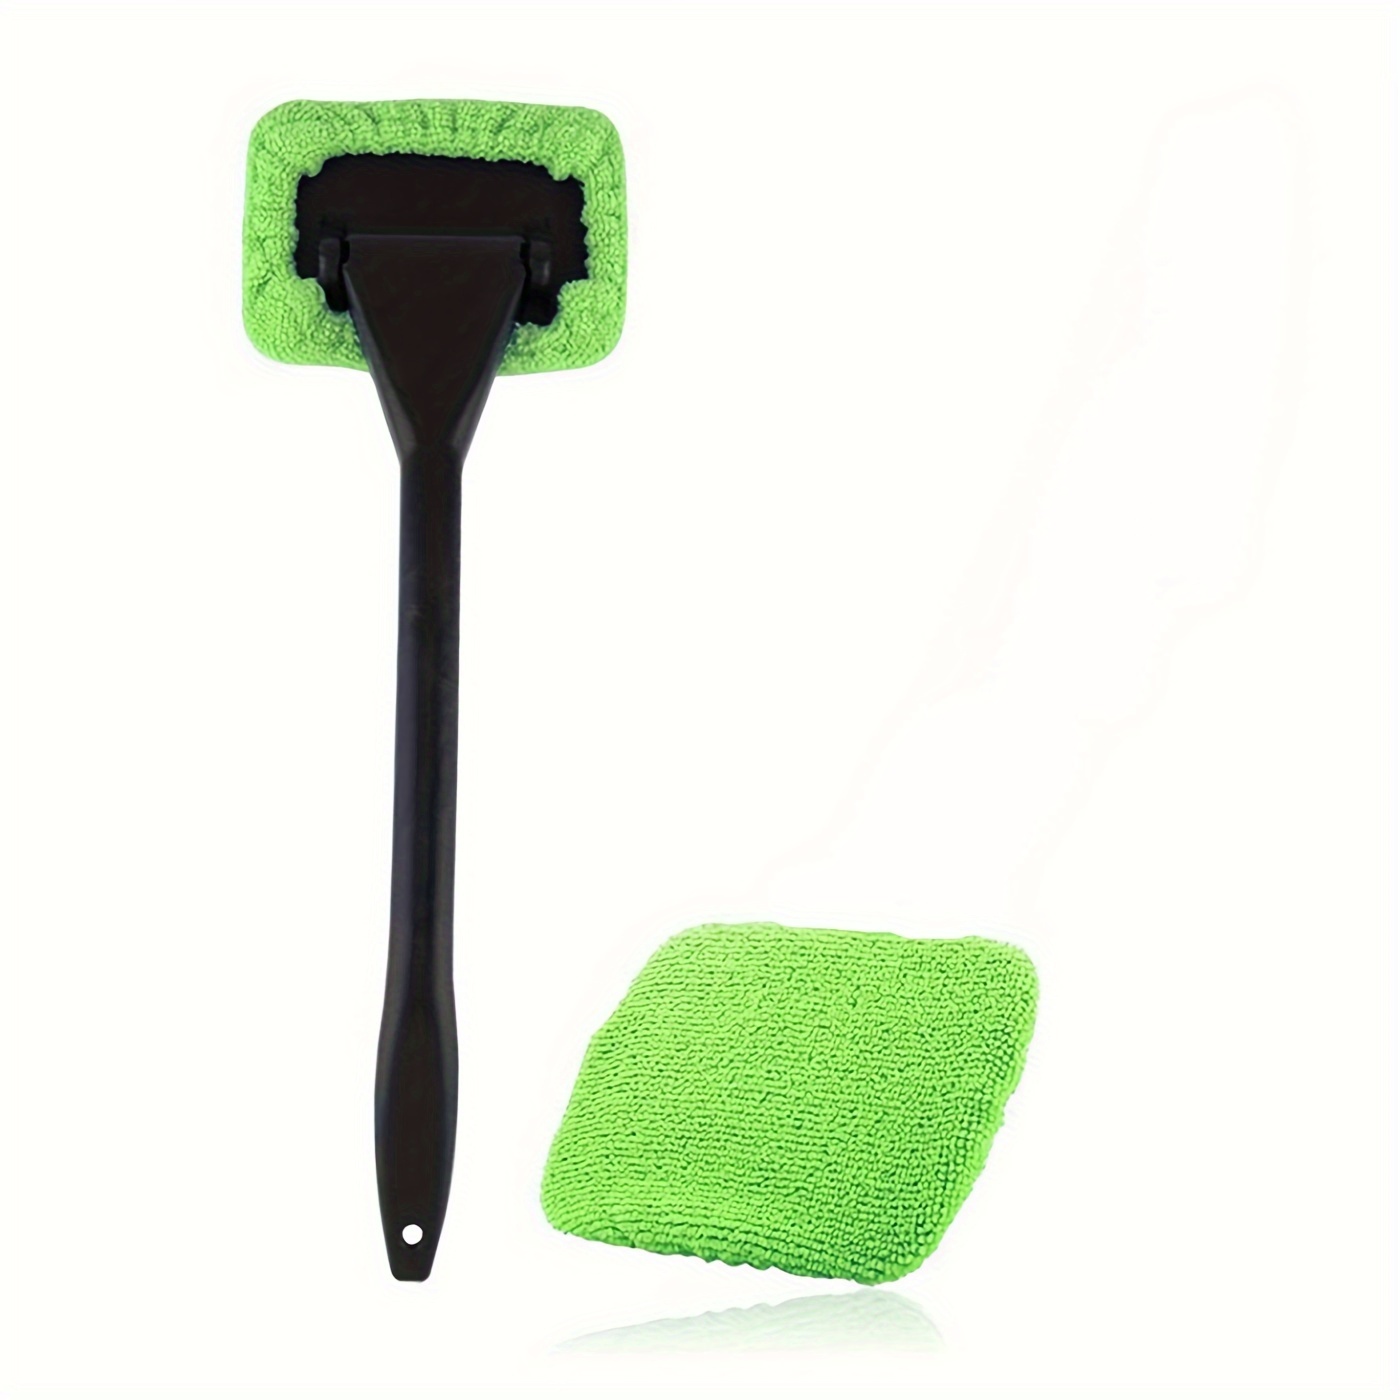 Windshield Cleaning Brush